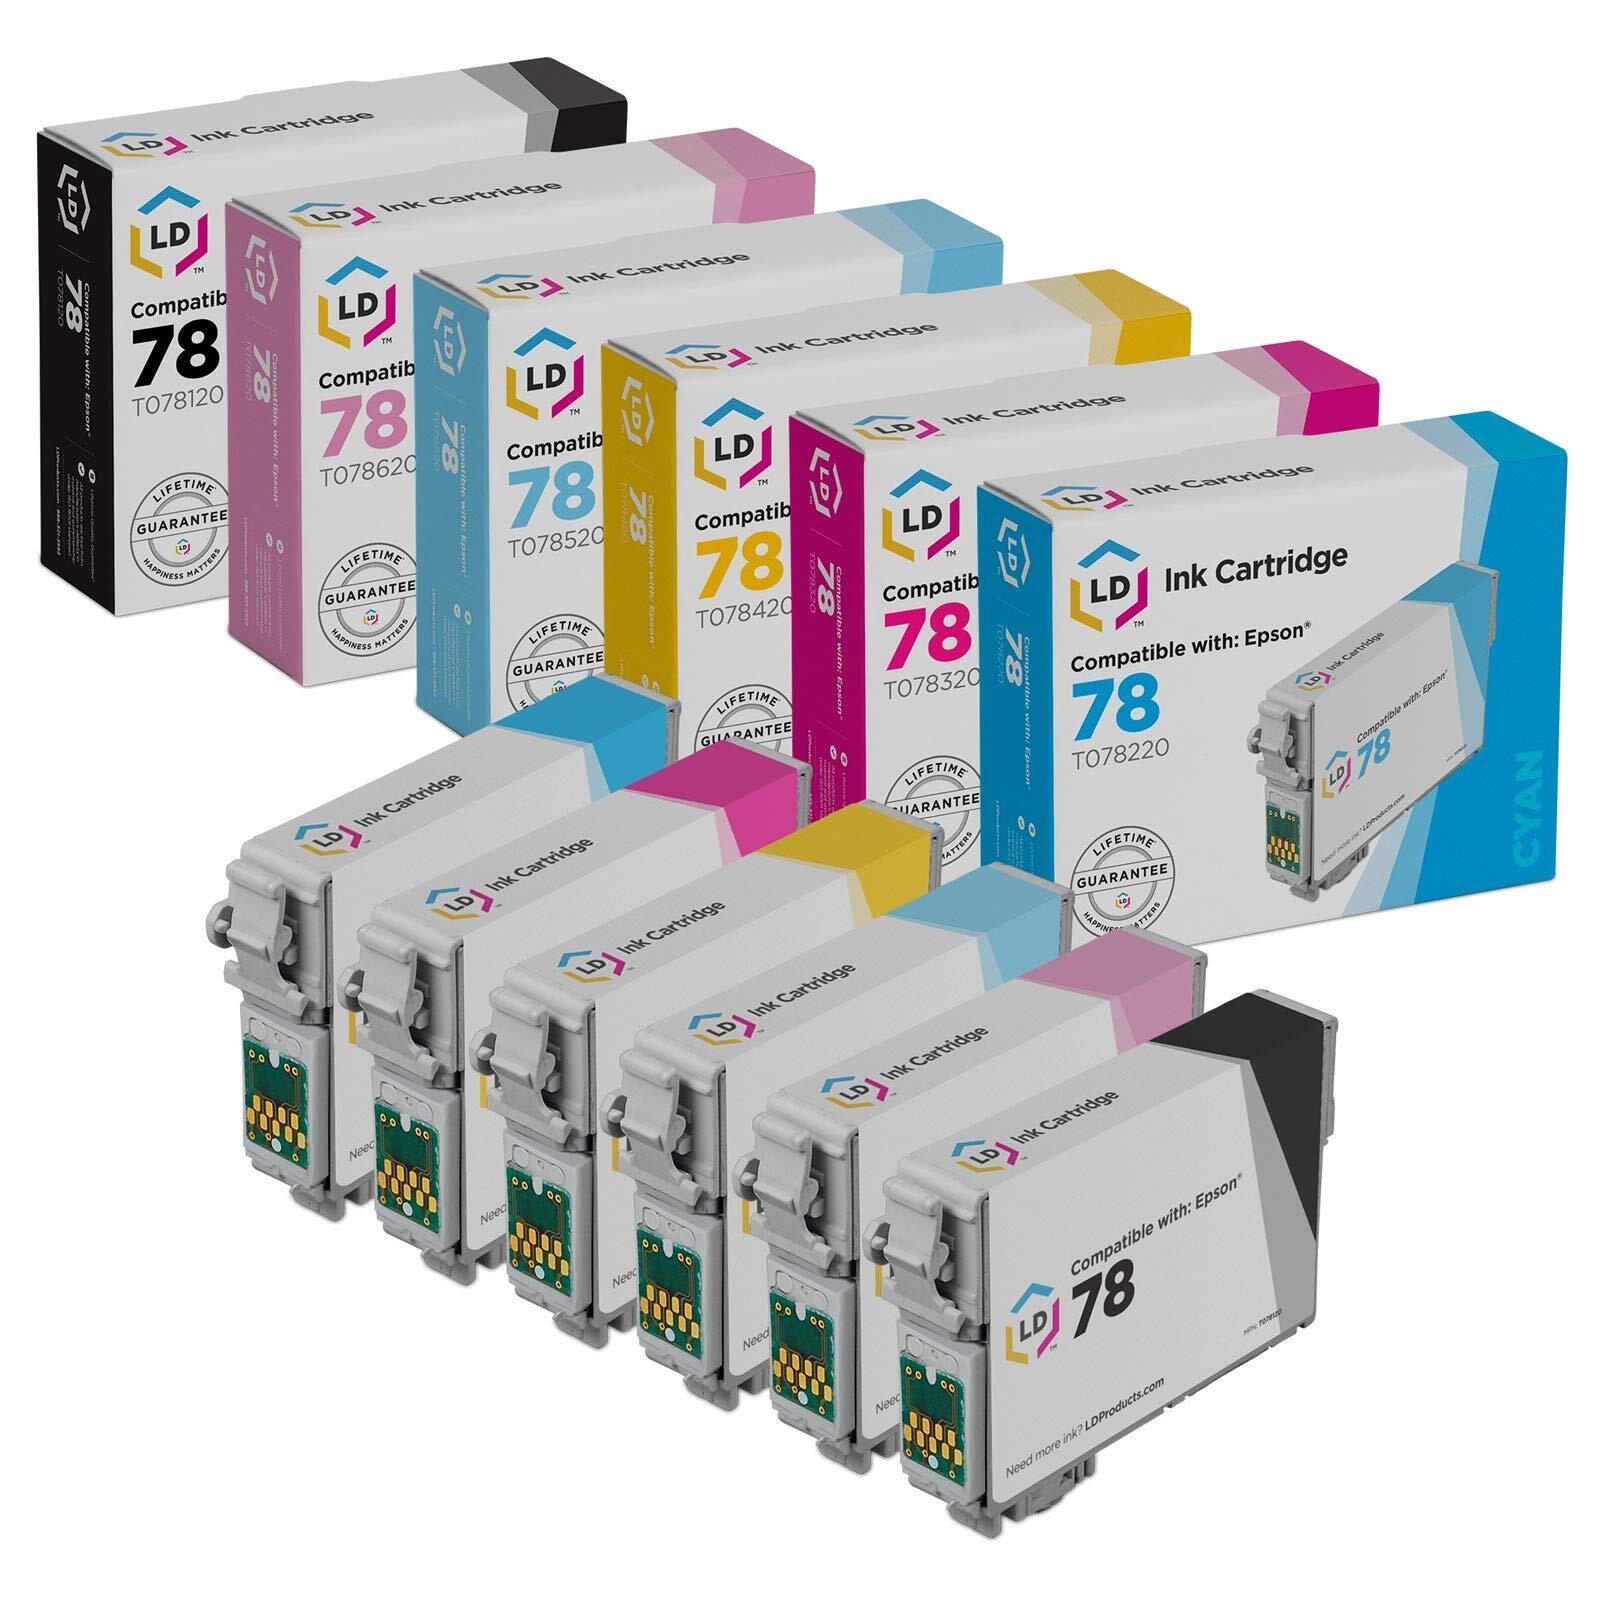 LD T078 Black and Color Ink Cartridges Set of 6 for Epson T078 #78  RX580 RX595